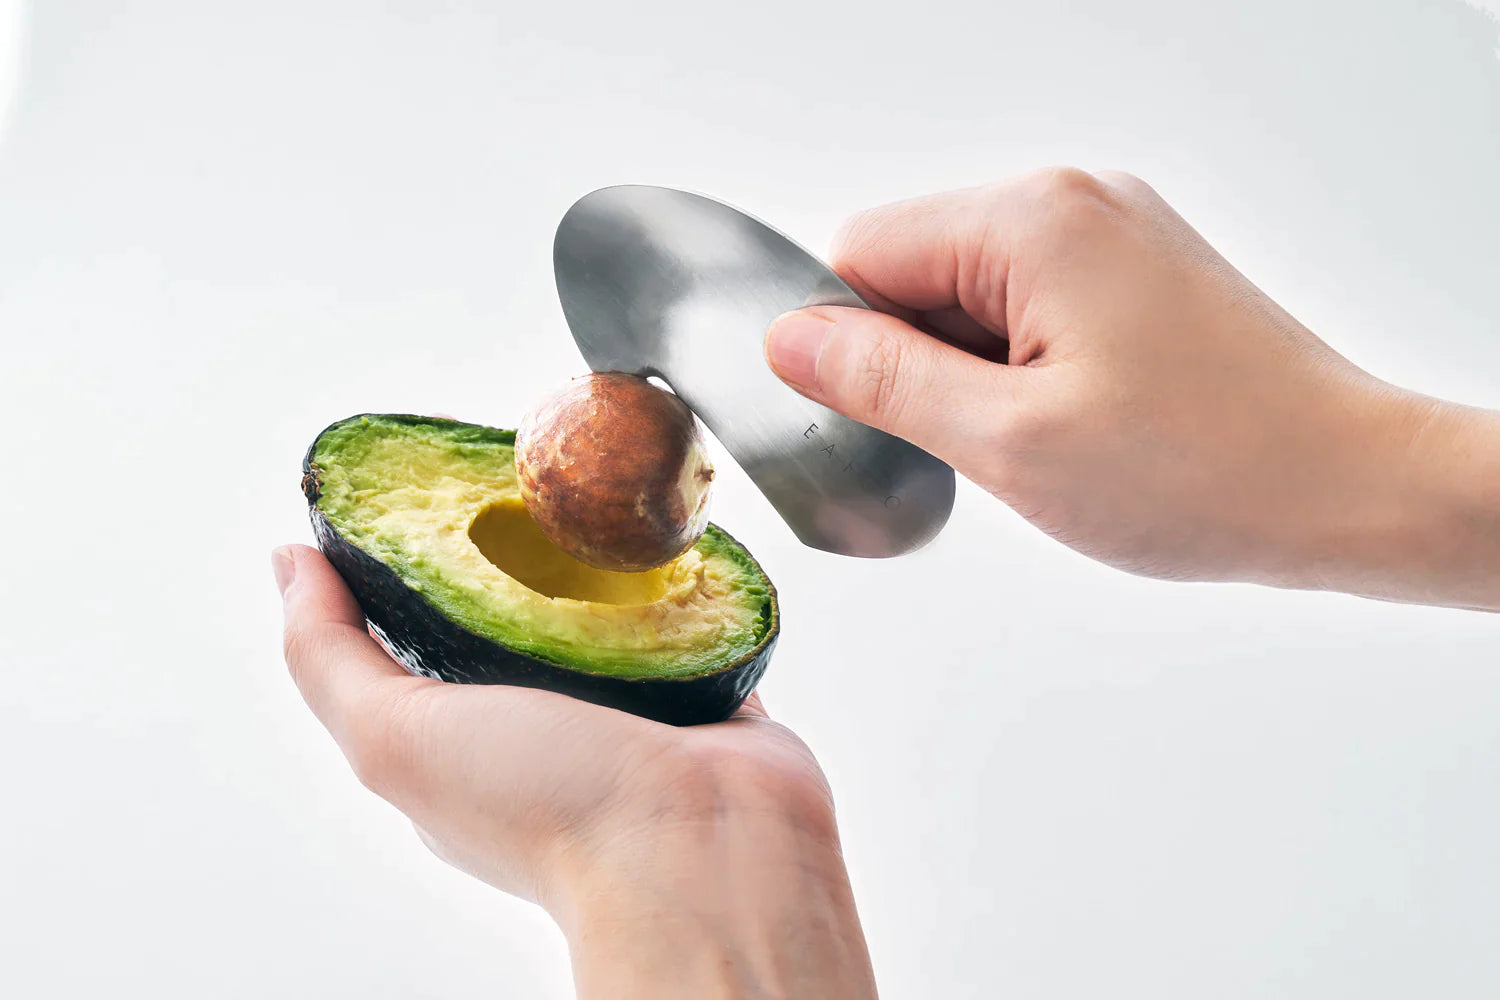 Avocado Cutter Slicer and Pitter 3 in 1, Avocado Tool with Silicon